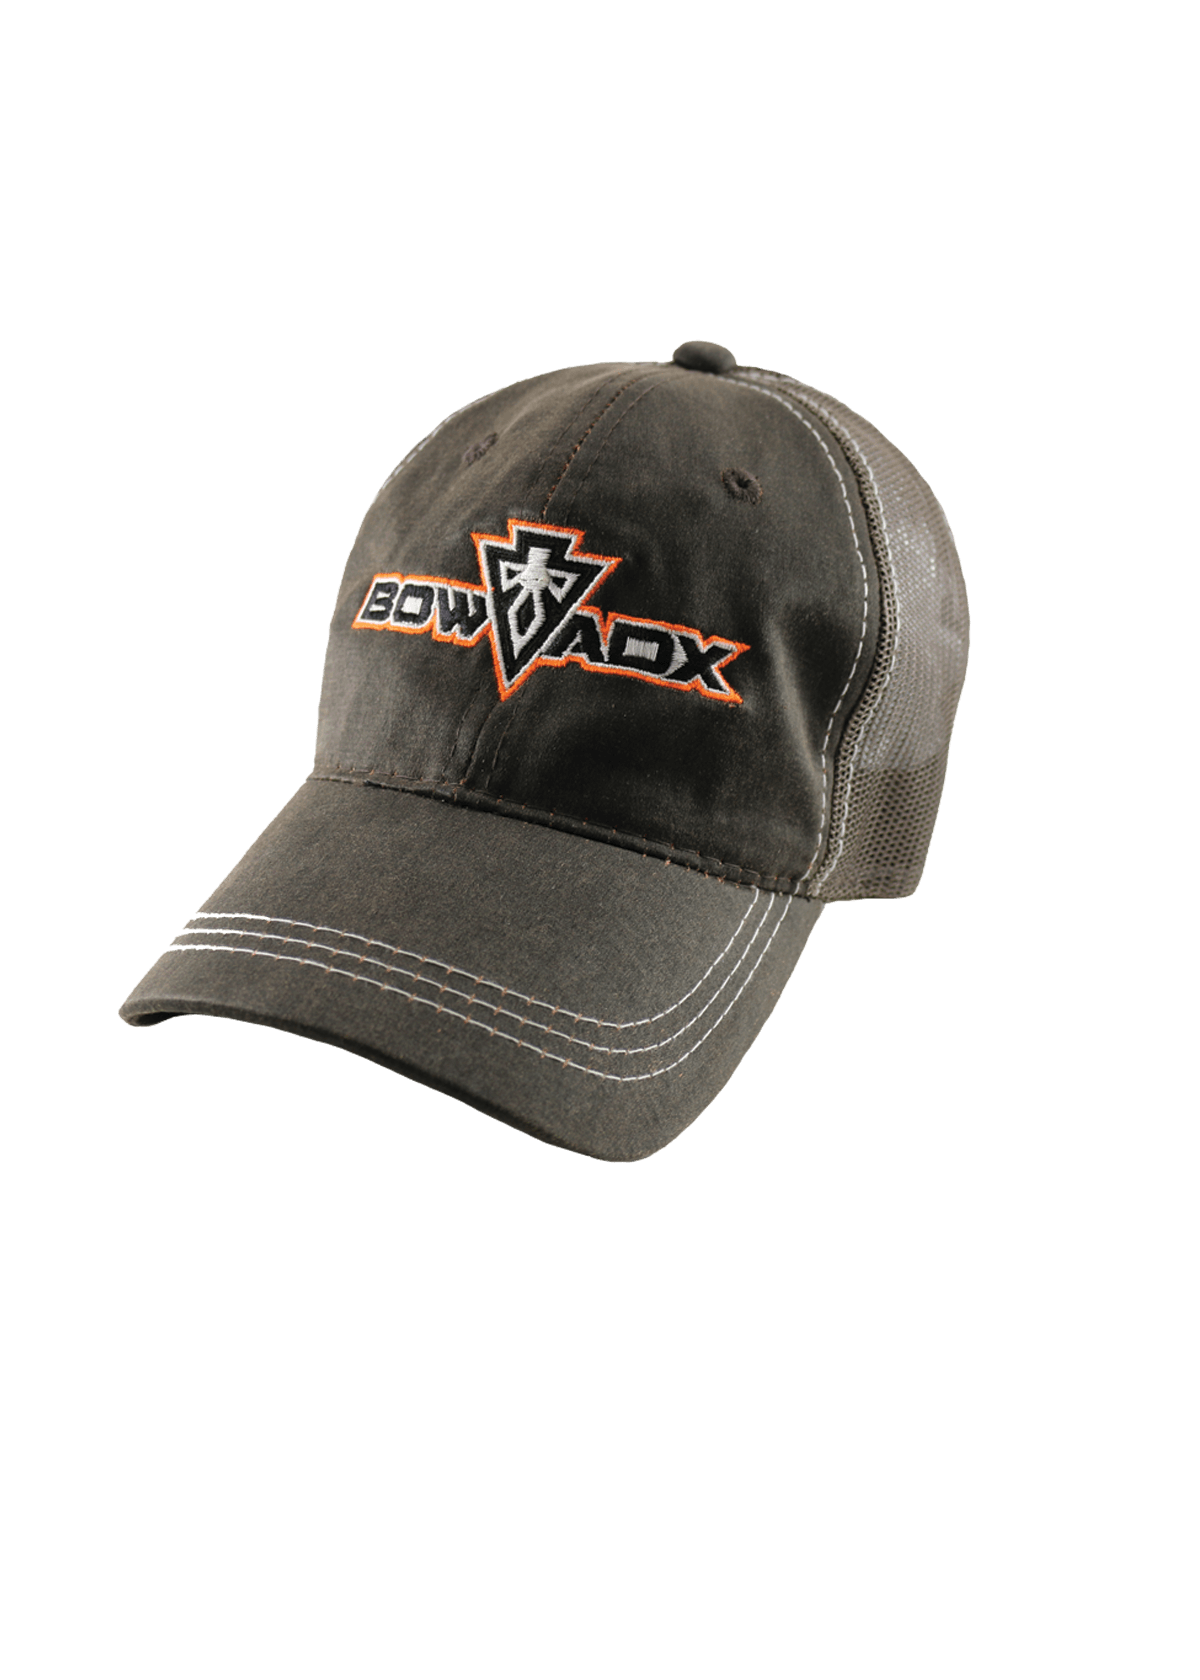 Hunting Apparel Logo - Rugged Brown Bow Hunting Hat With Orange Logo. Bow Hunting T Shirts